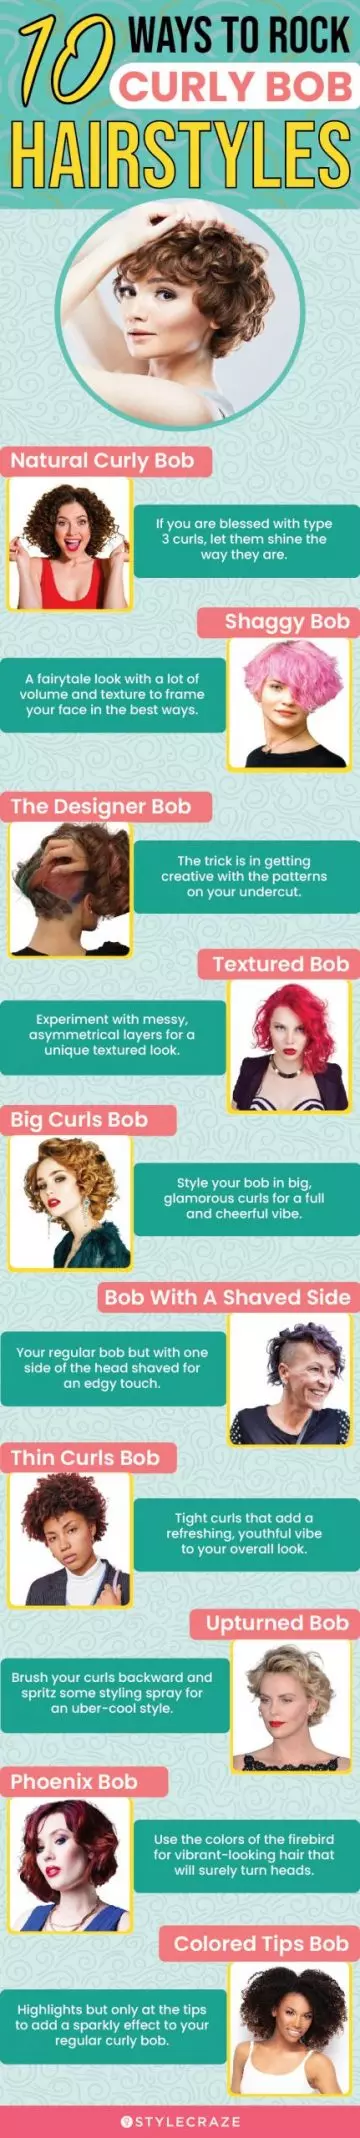 10 ways to rock curly bob hairstyles (infographic)